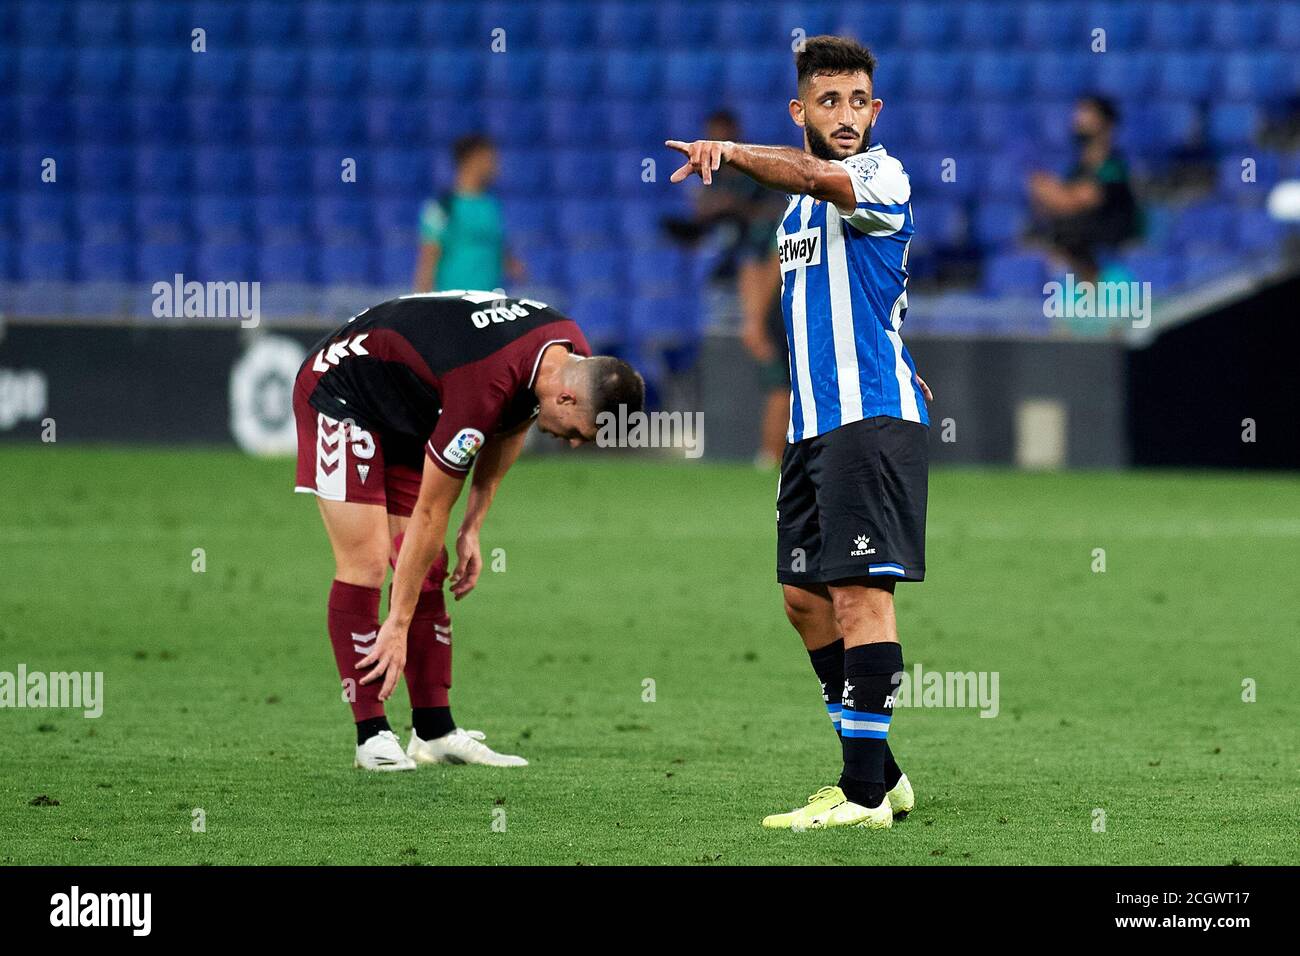 Barcelona, Spain. 12th Sep, 2020. Matias Vargas during the Liga SmartBank match between RCD Espanyol and vs Albacete Balompie at RCD Stadium on September 12, 2020 in Barcelona, Spain. Credit: Dax Images/Alamy Live News Stock Photo